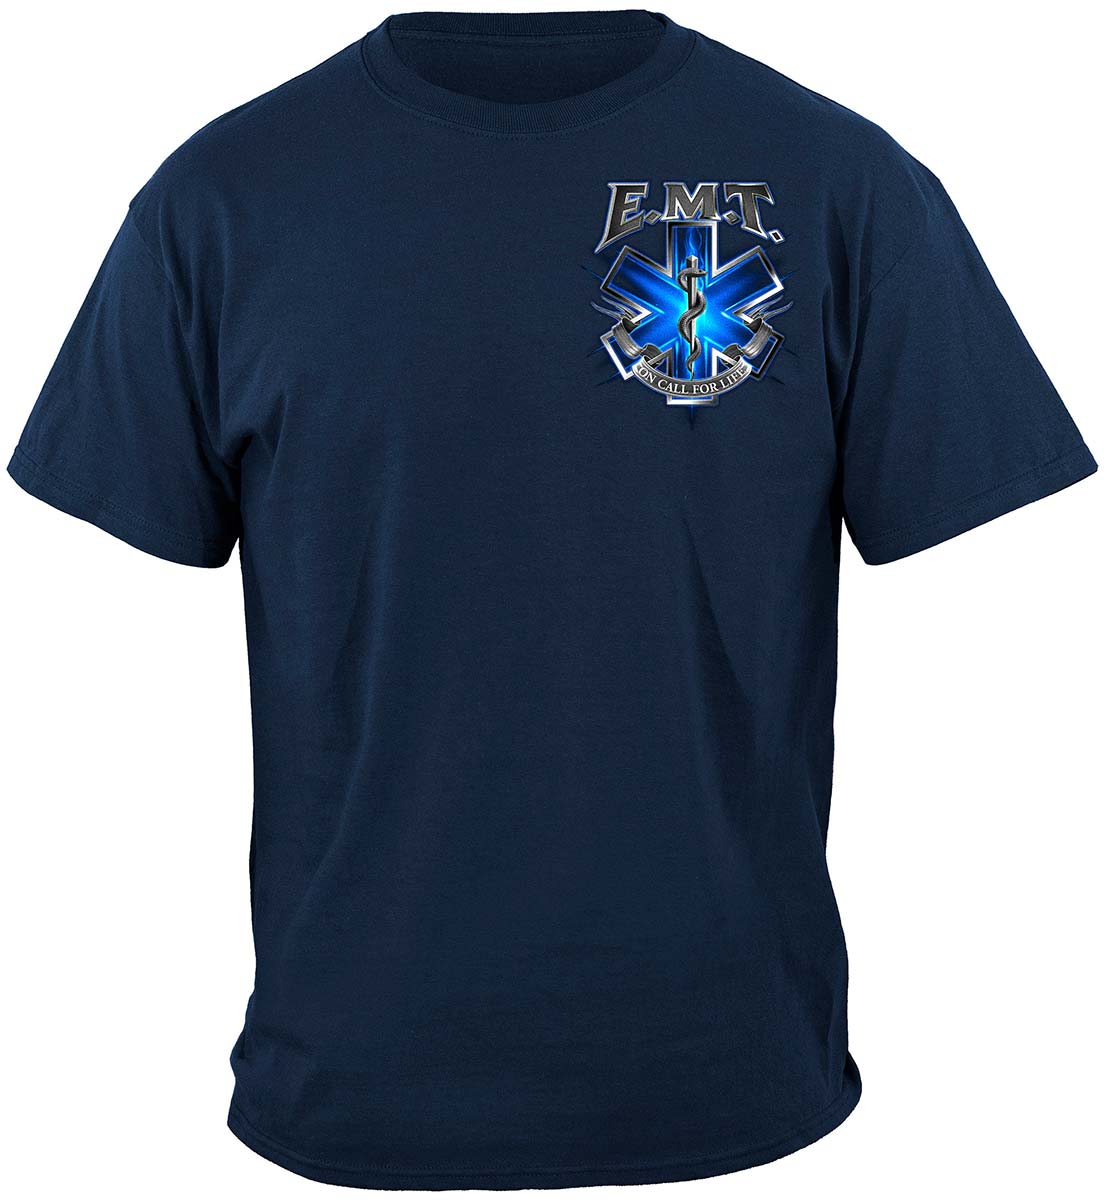 On Call For Life EMT Premium T-Shirt